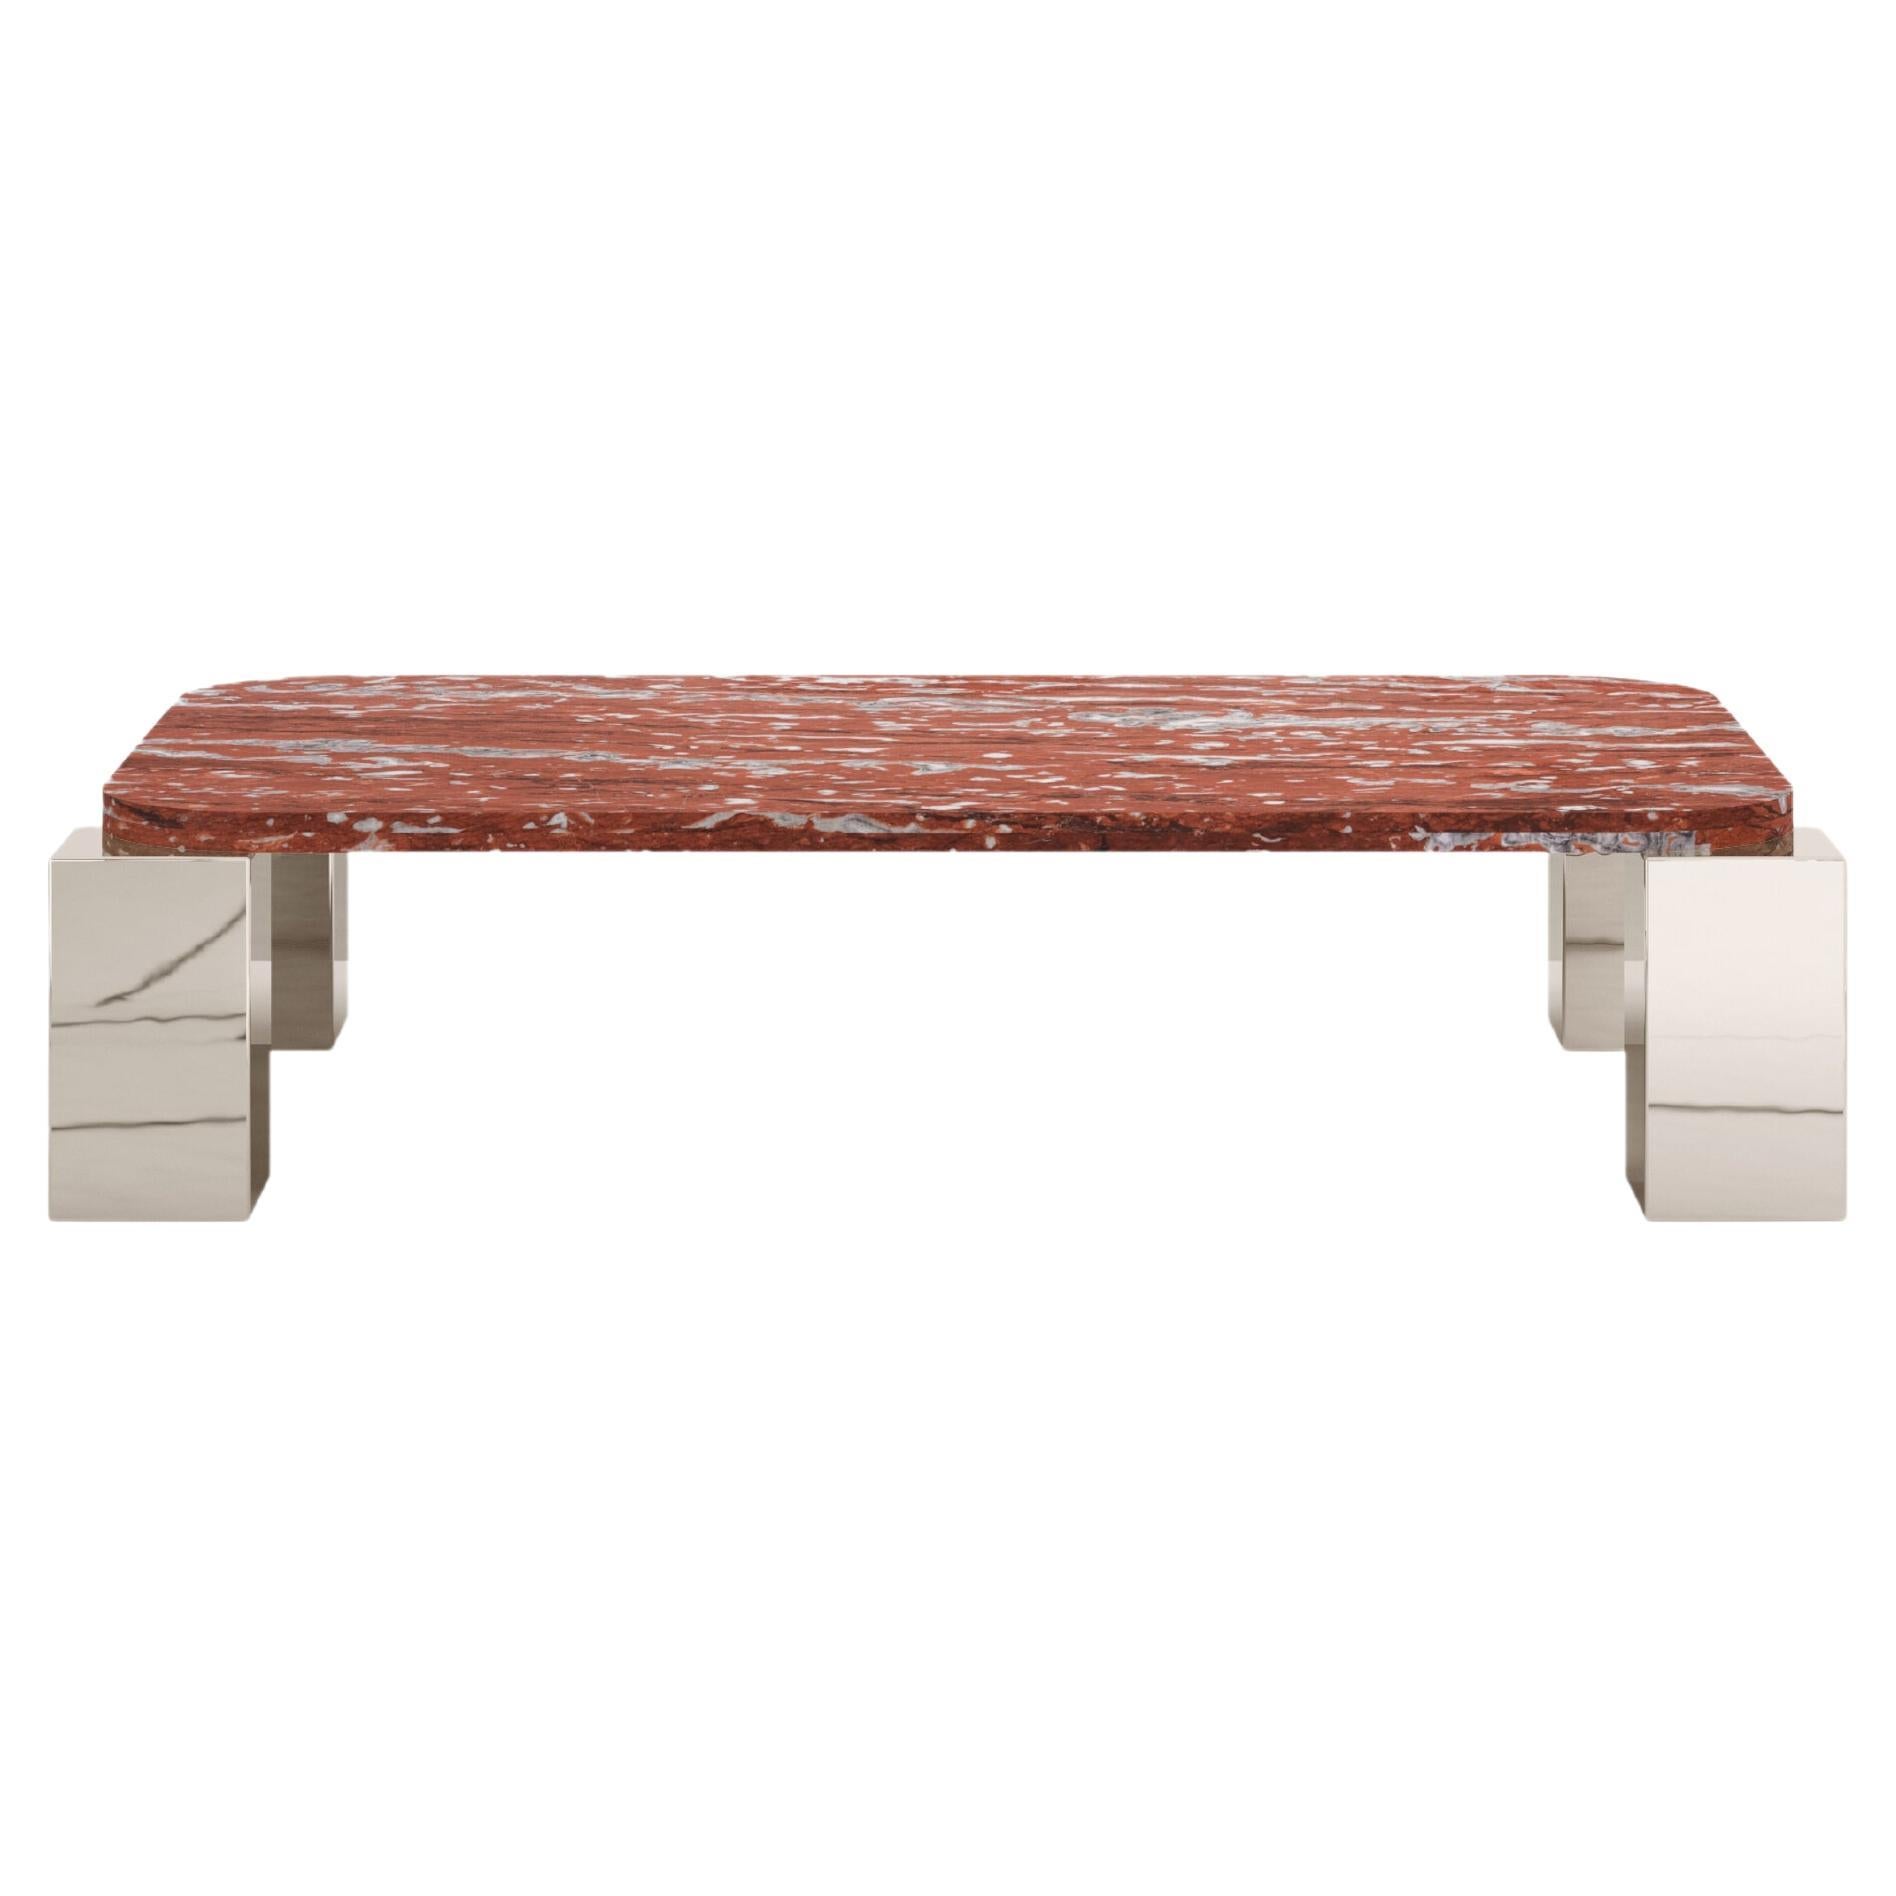 FORM(LA) Cubo Rectangle Coffee Table 50”L x 32”W x 14”H Francia Marble & Chrome For Sale